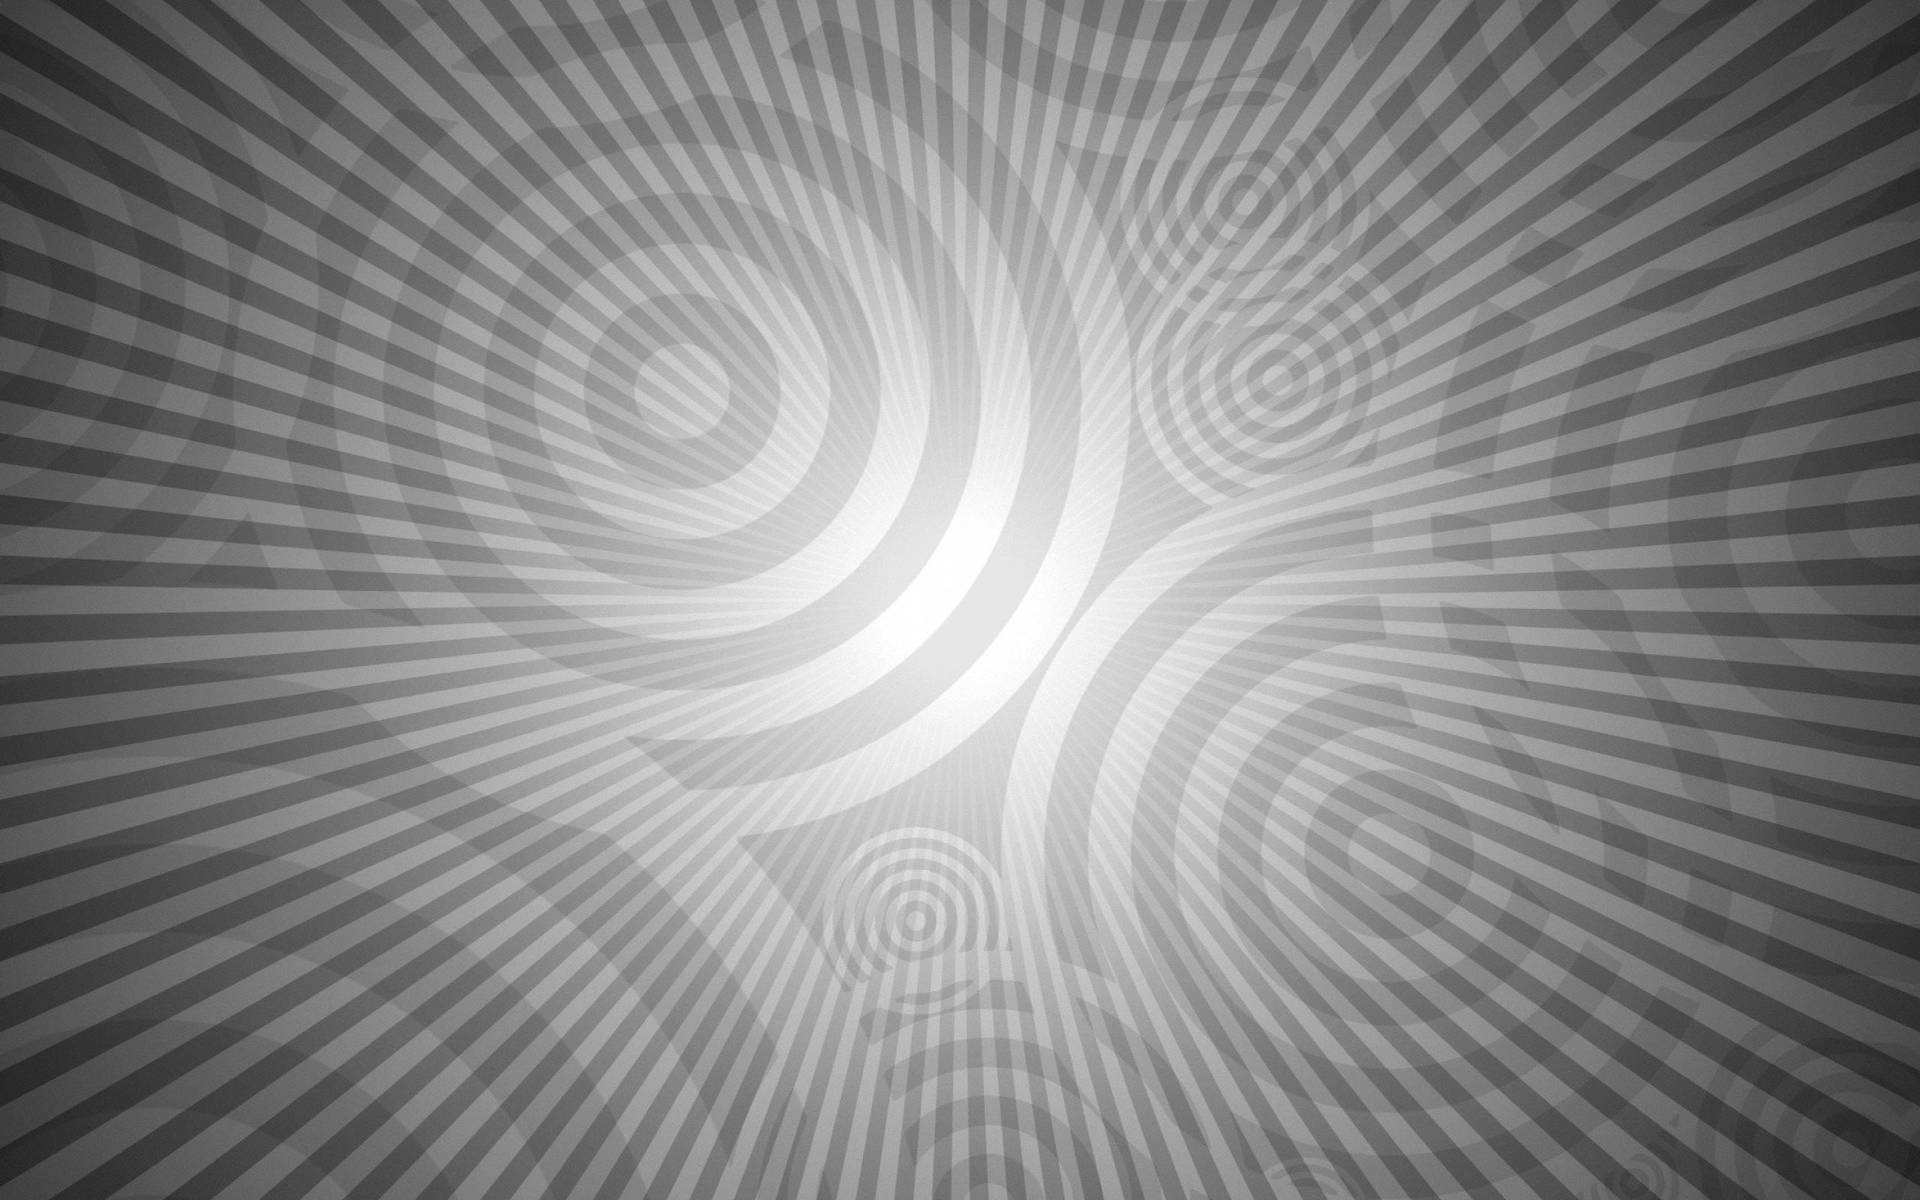 Hypnosis Bright Concentric Circles